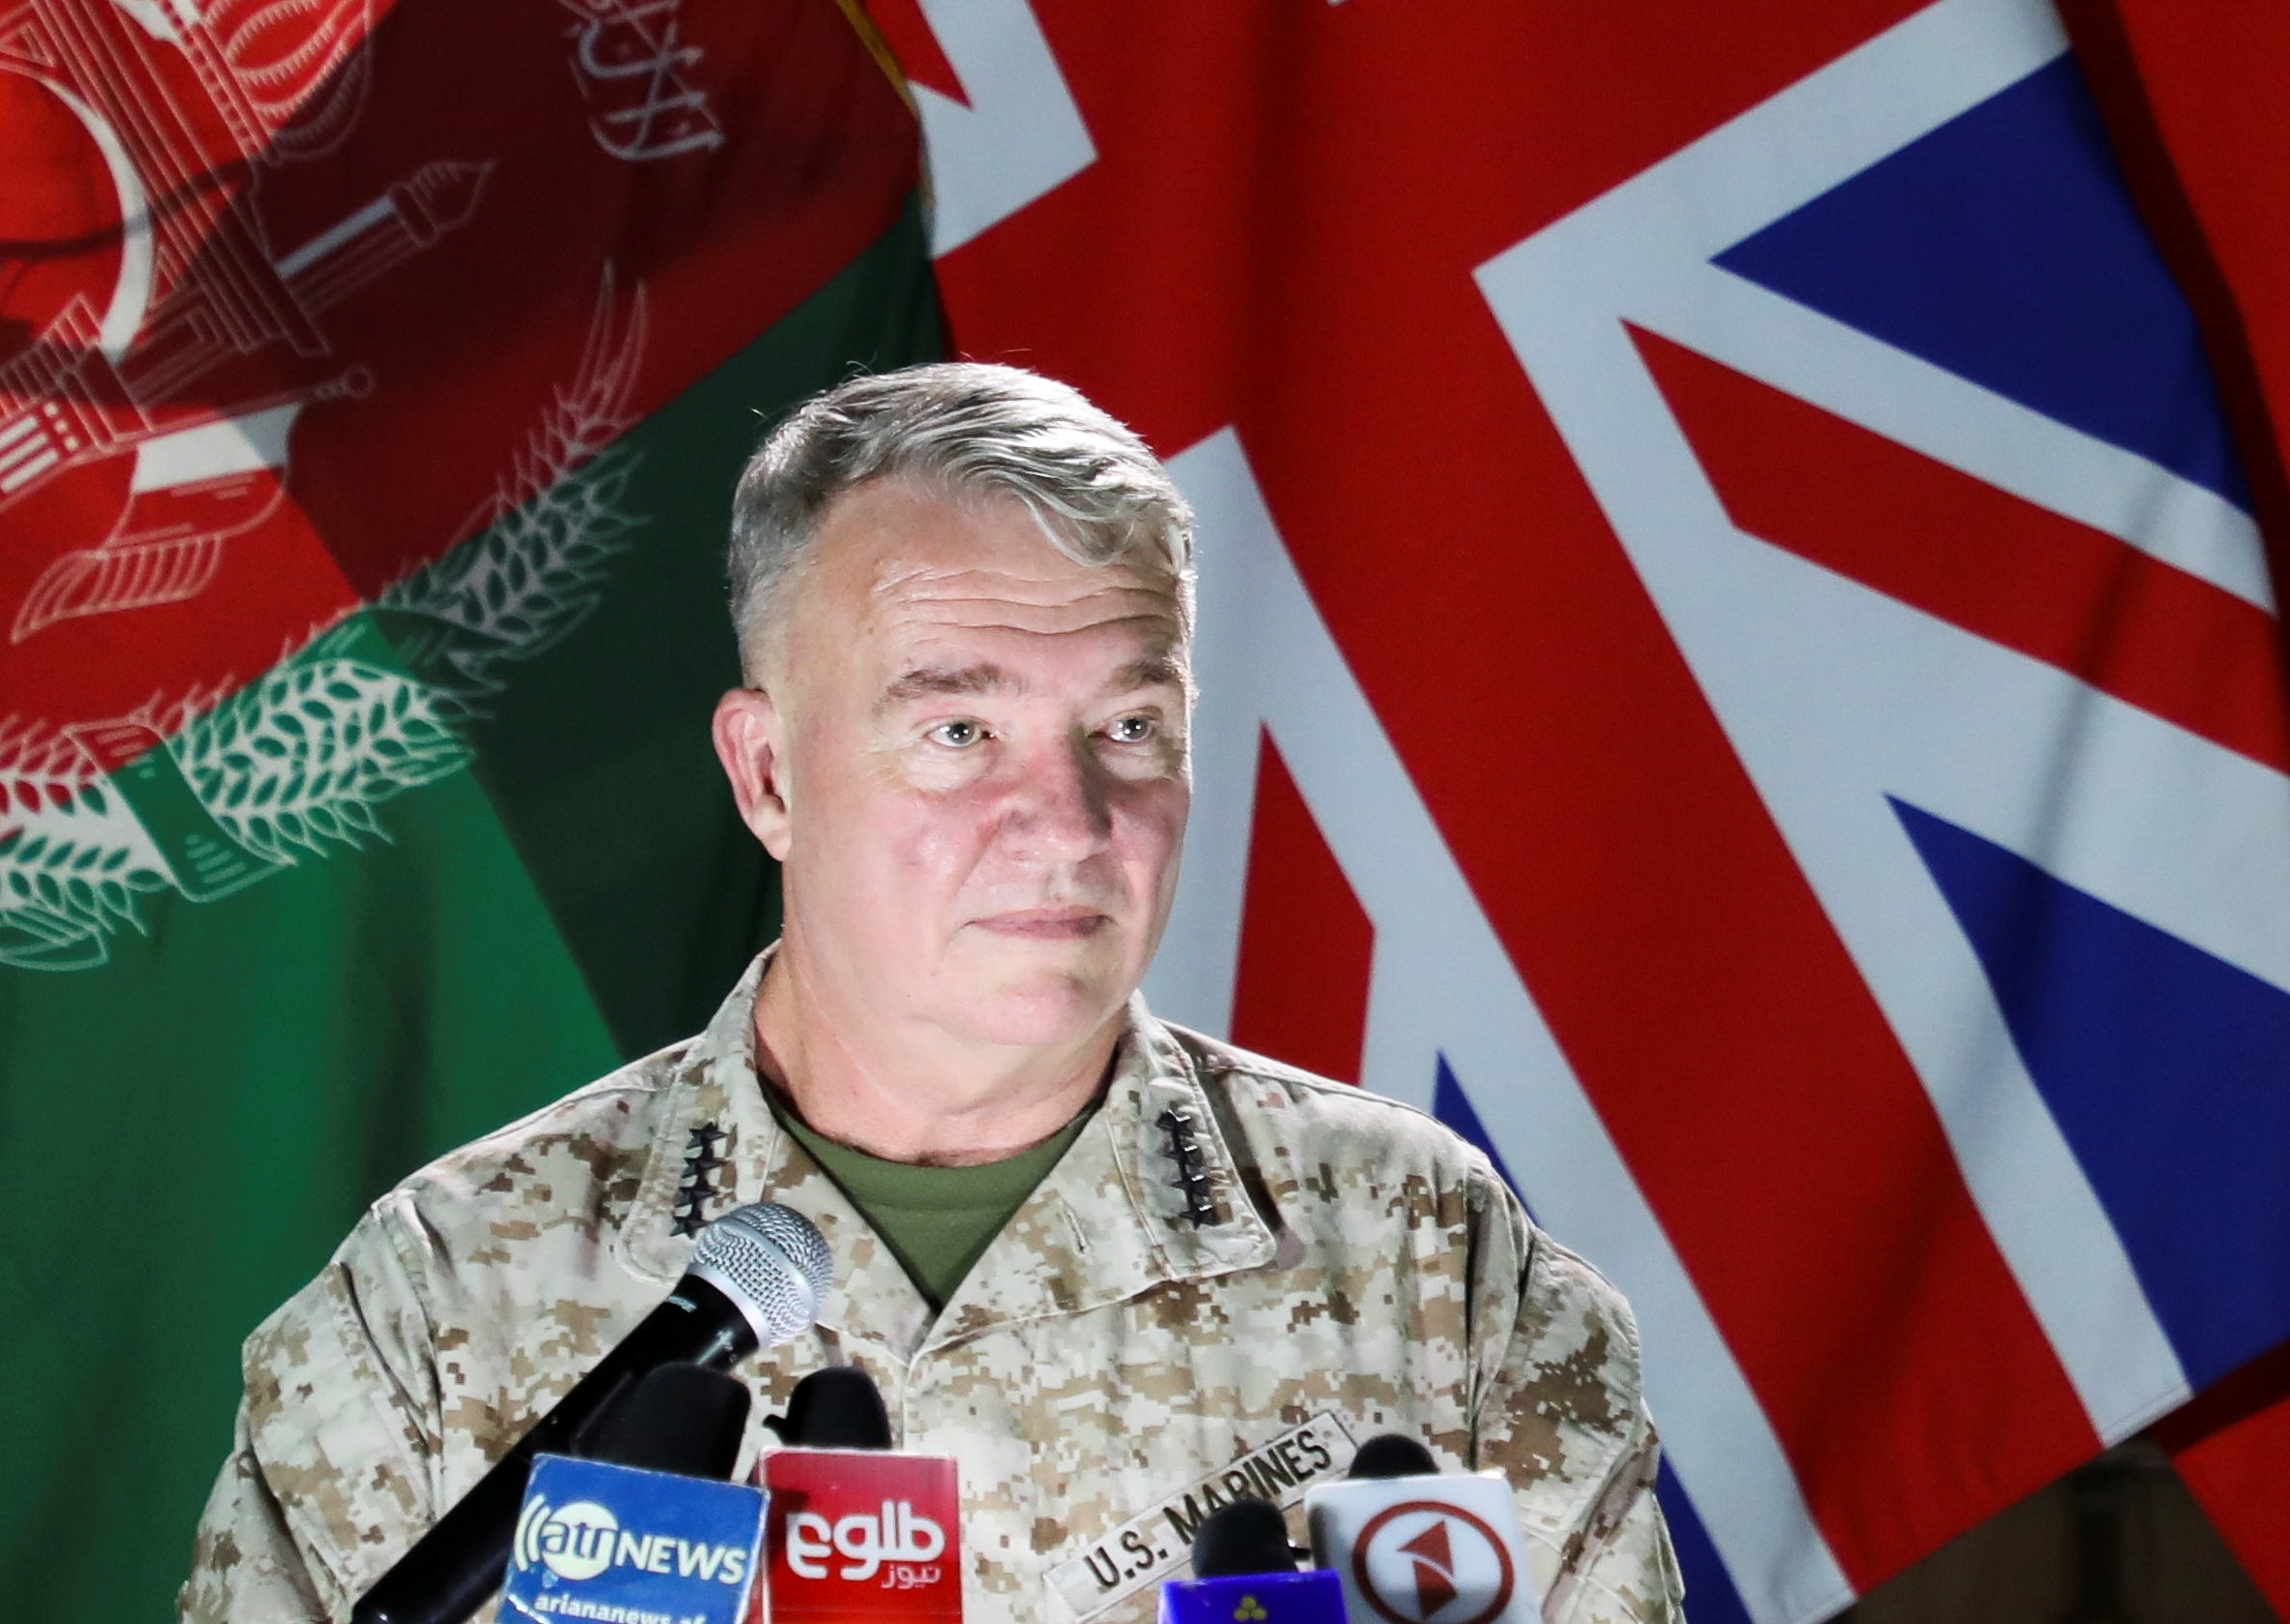 U.S. Marine Corps General McKenzie, commander of U.S. Central Command, speaks during a news conference, in Kabul